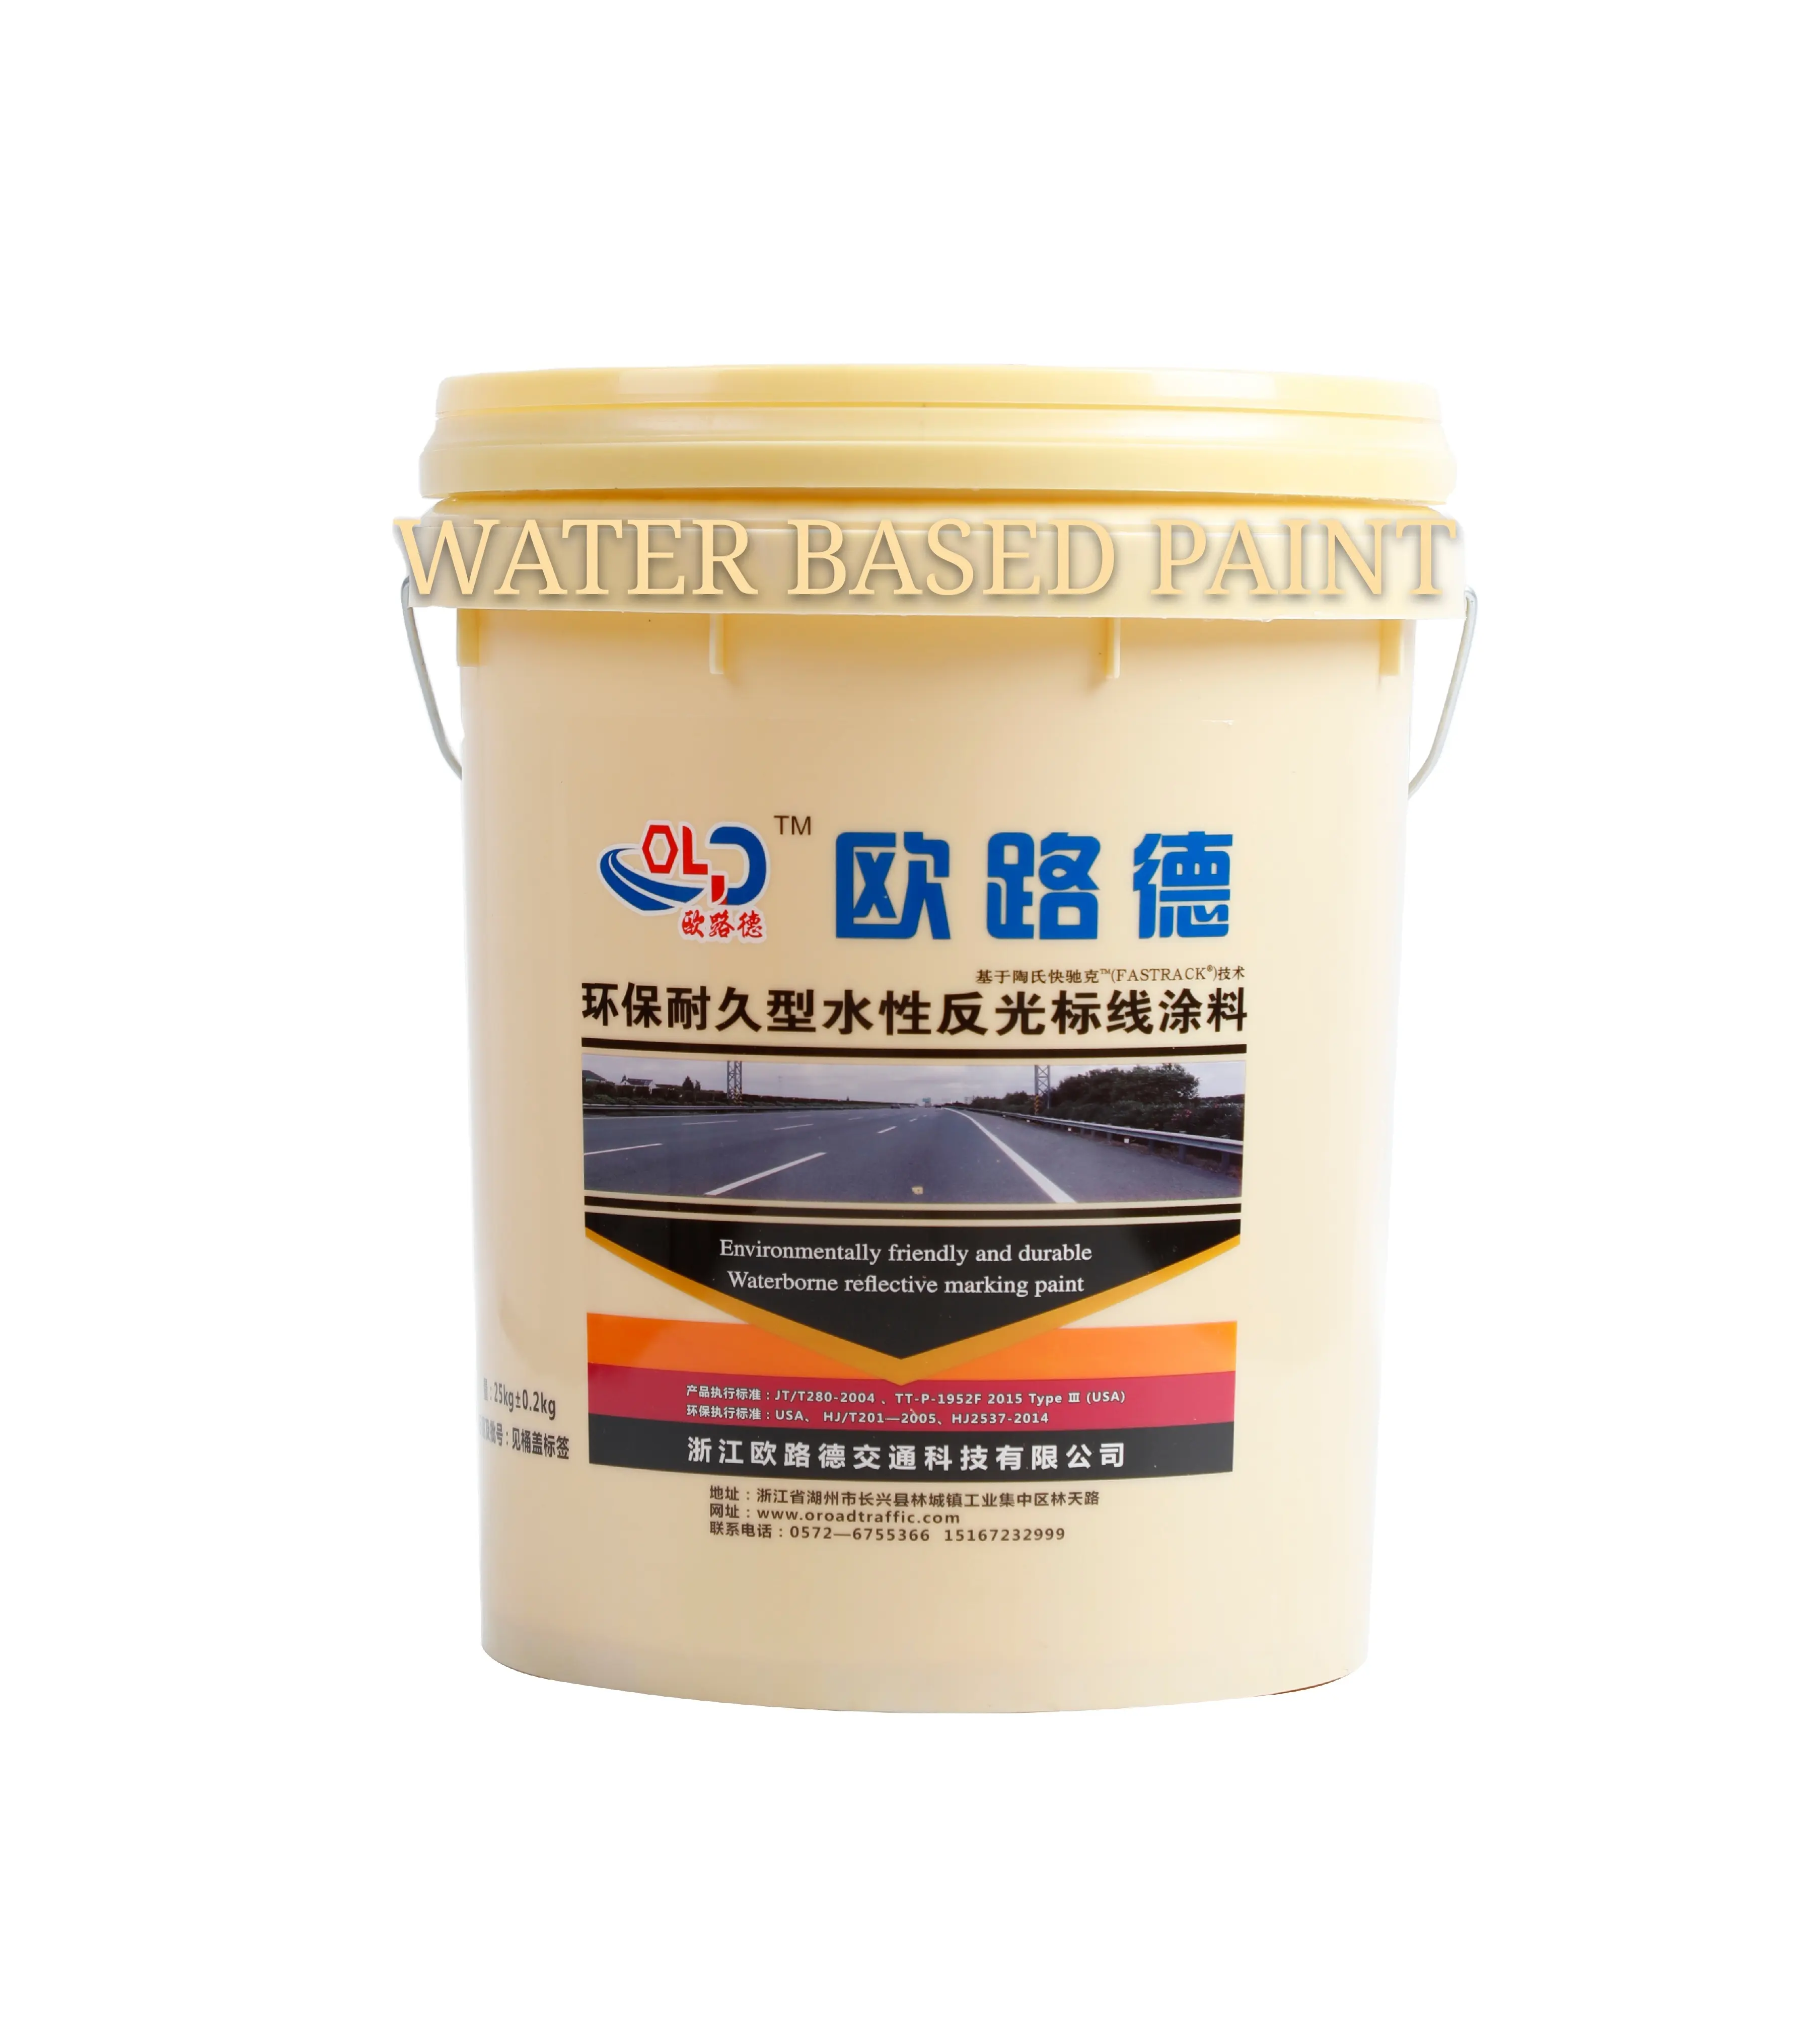 Environmentally Friendly And Durable water-based paint